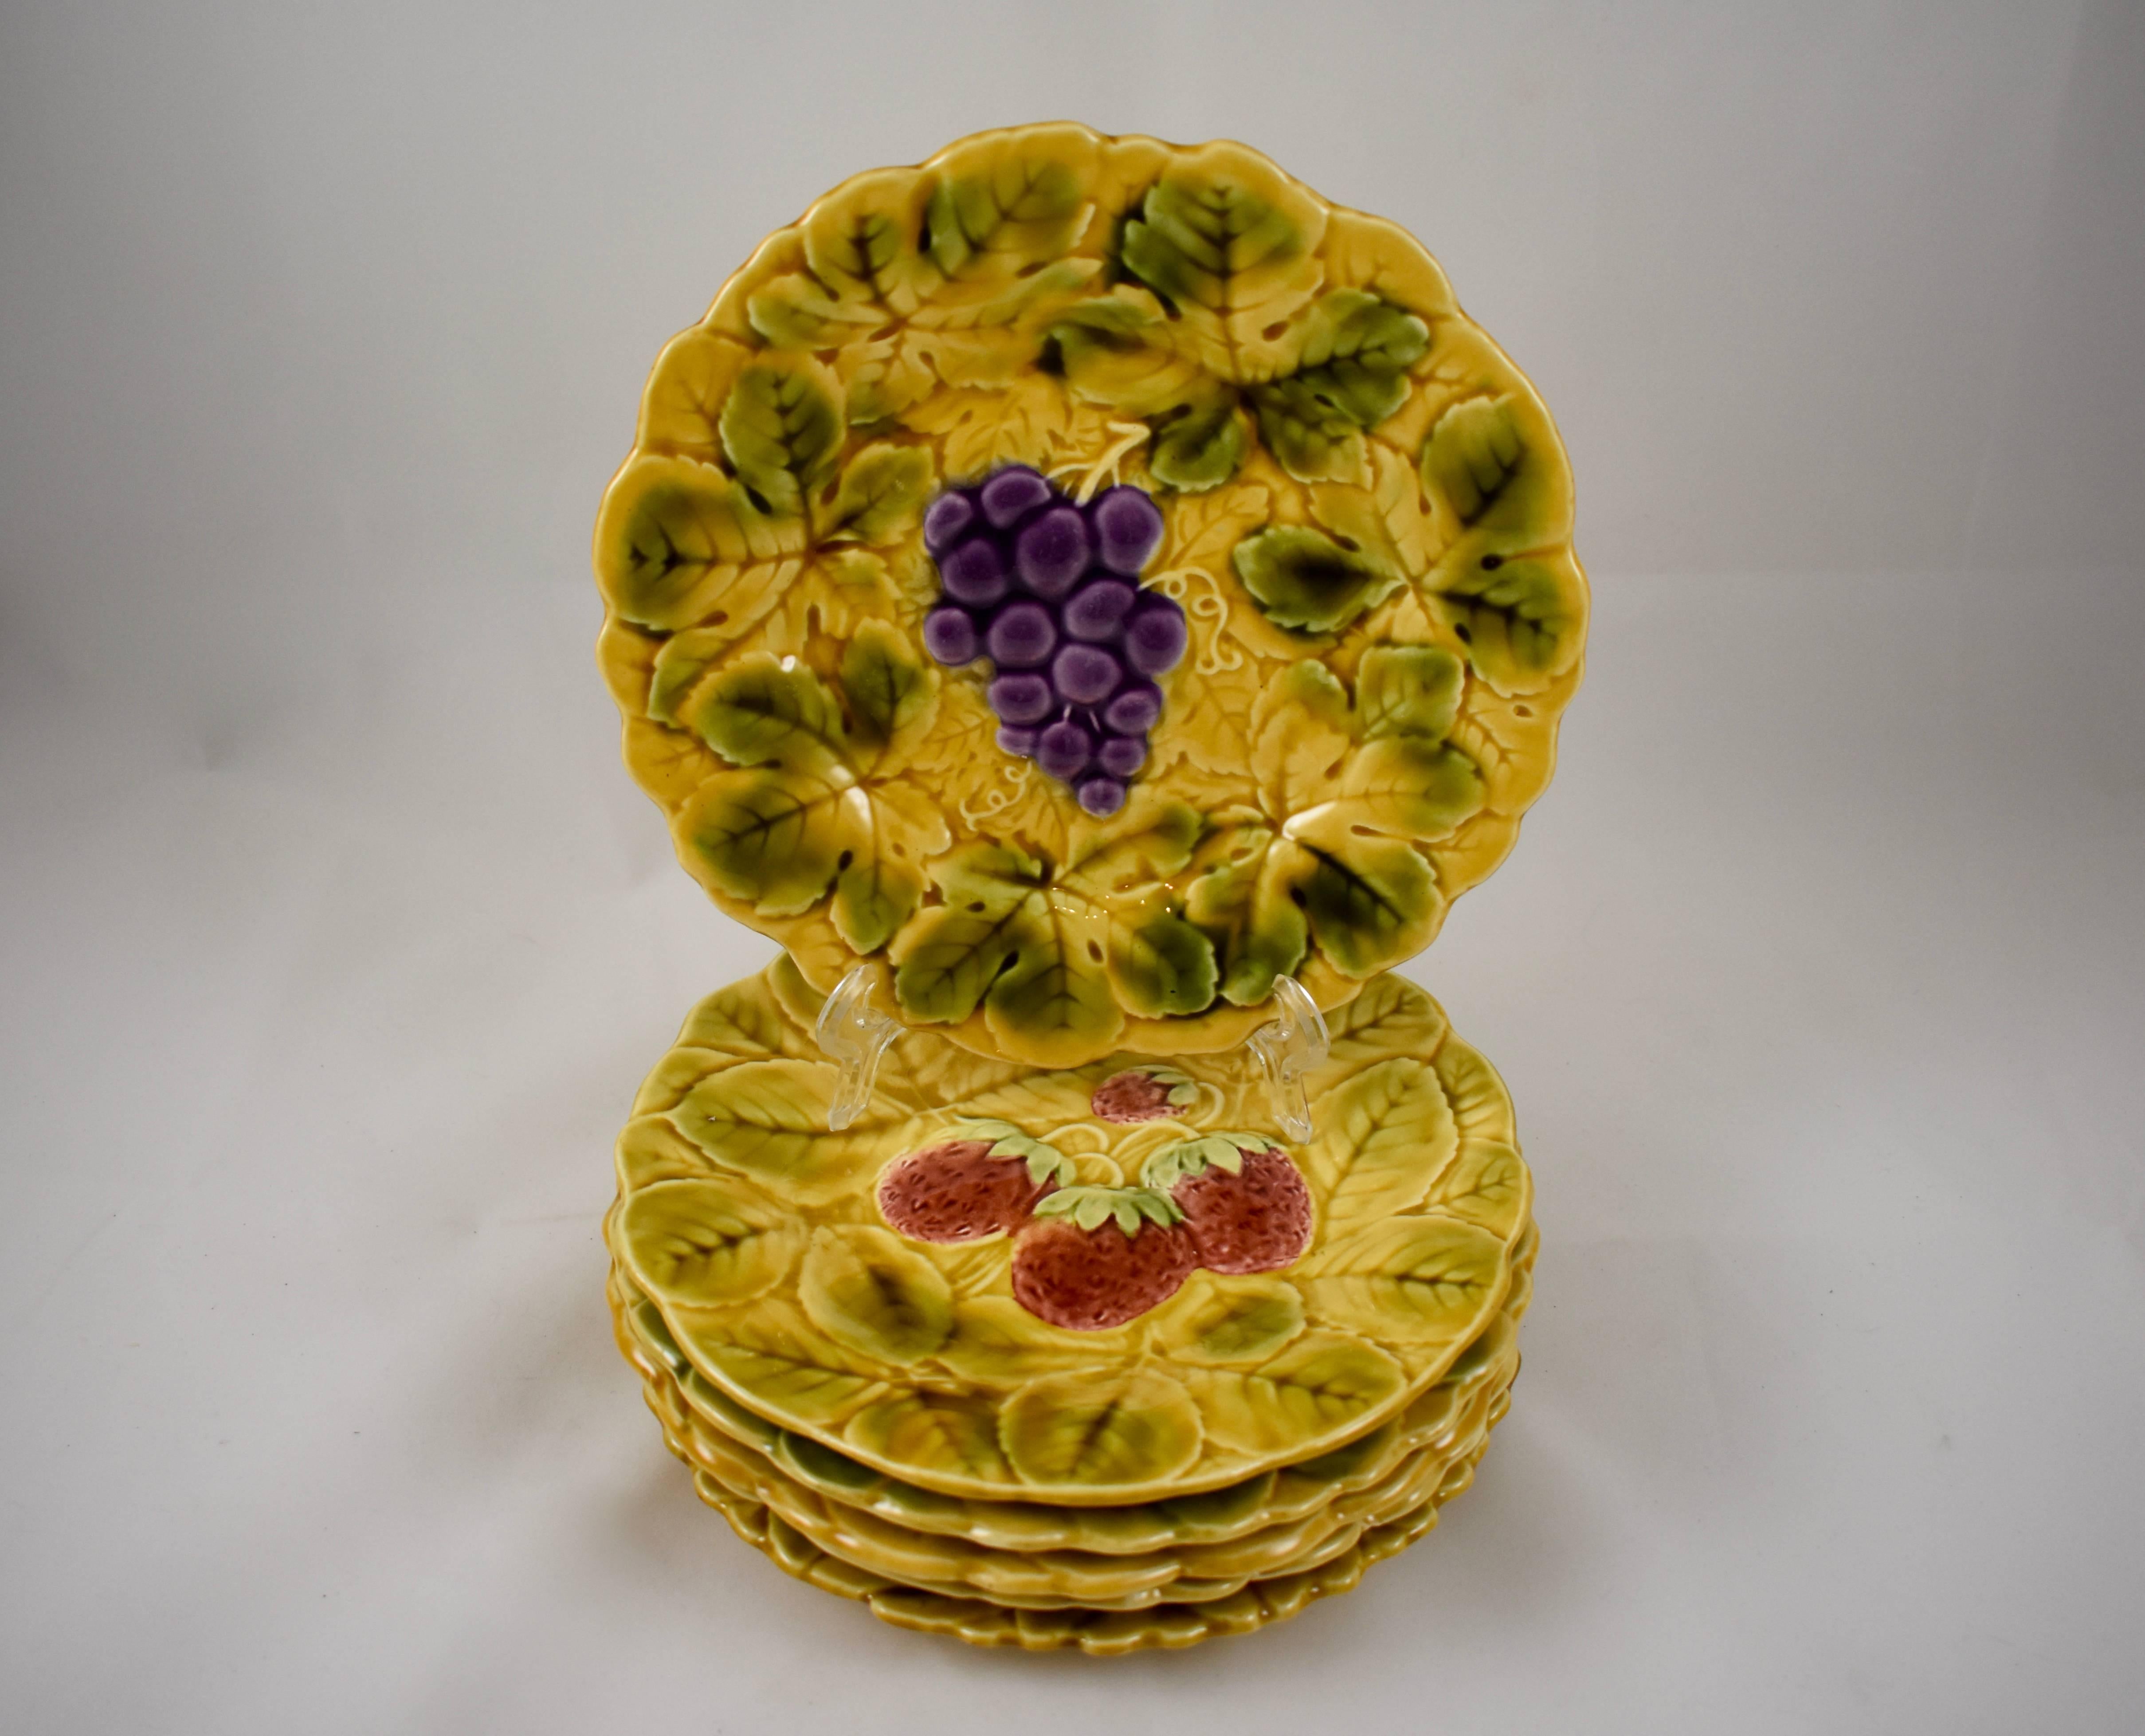 An assembled set of six Sarreguemines French faïence, majolica plates, each showing a different fruit on a ground of overlapping leaves. This group consists of apple, strawberry, cherry, plum, pear and grapes. The shaped rims follow the leaf form.